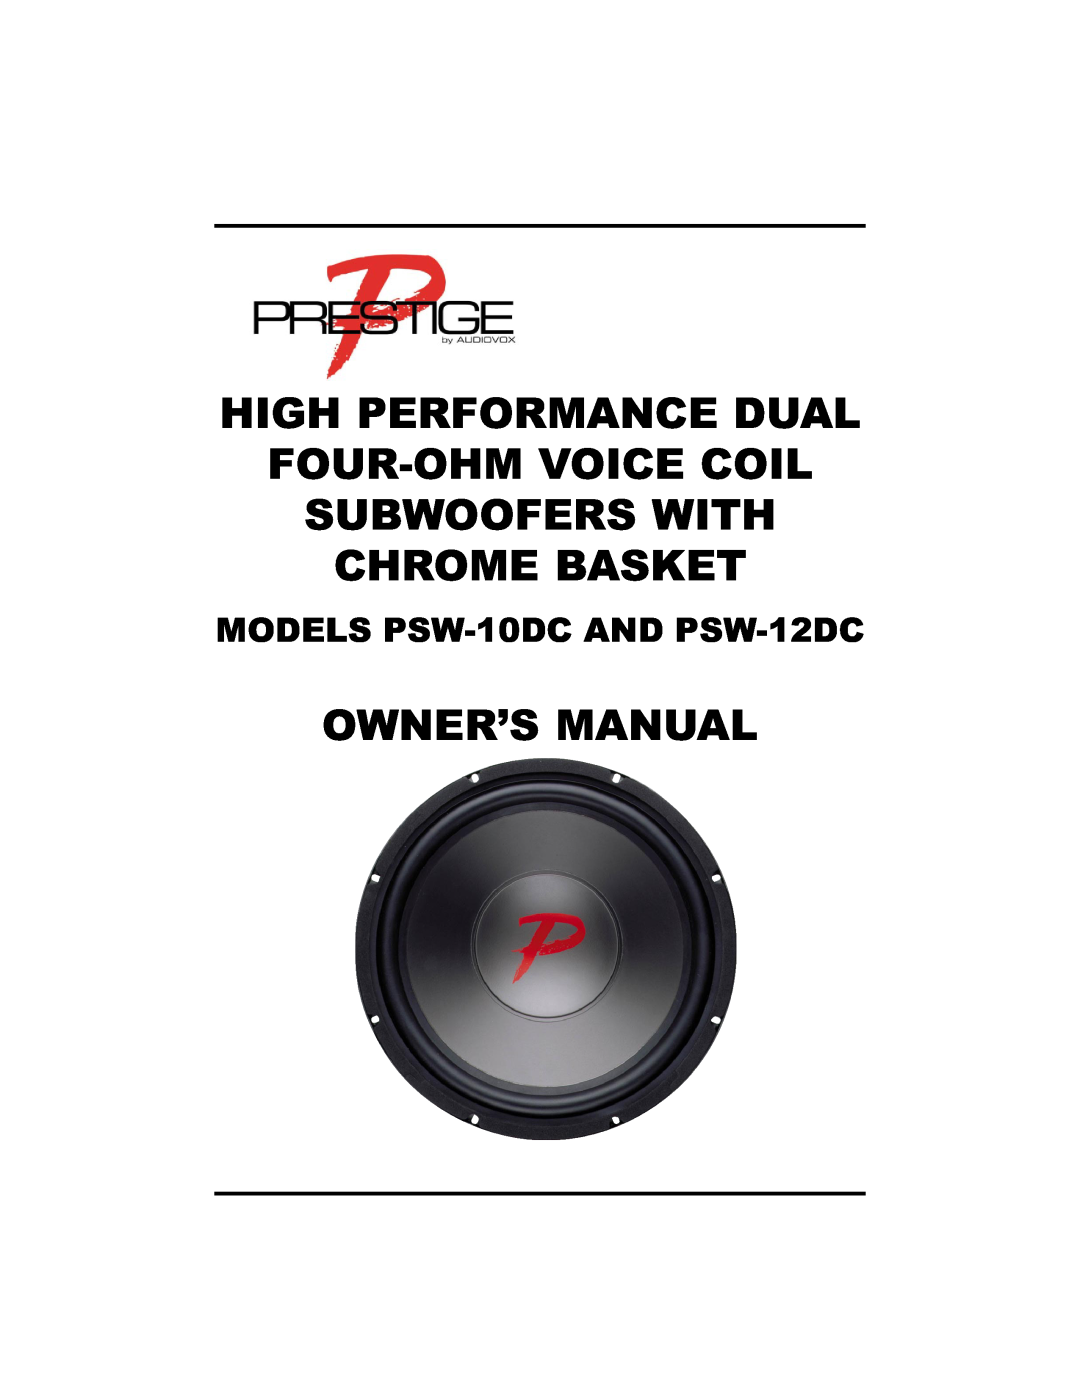 Audiovox PSW-12DC, PSW-10DC manual High Performance Dual Four-Ohmvoice Coil, Subwoofers With Chrome Basket 